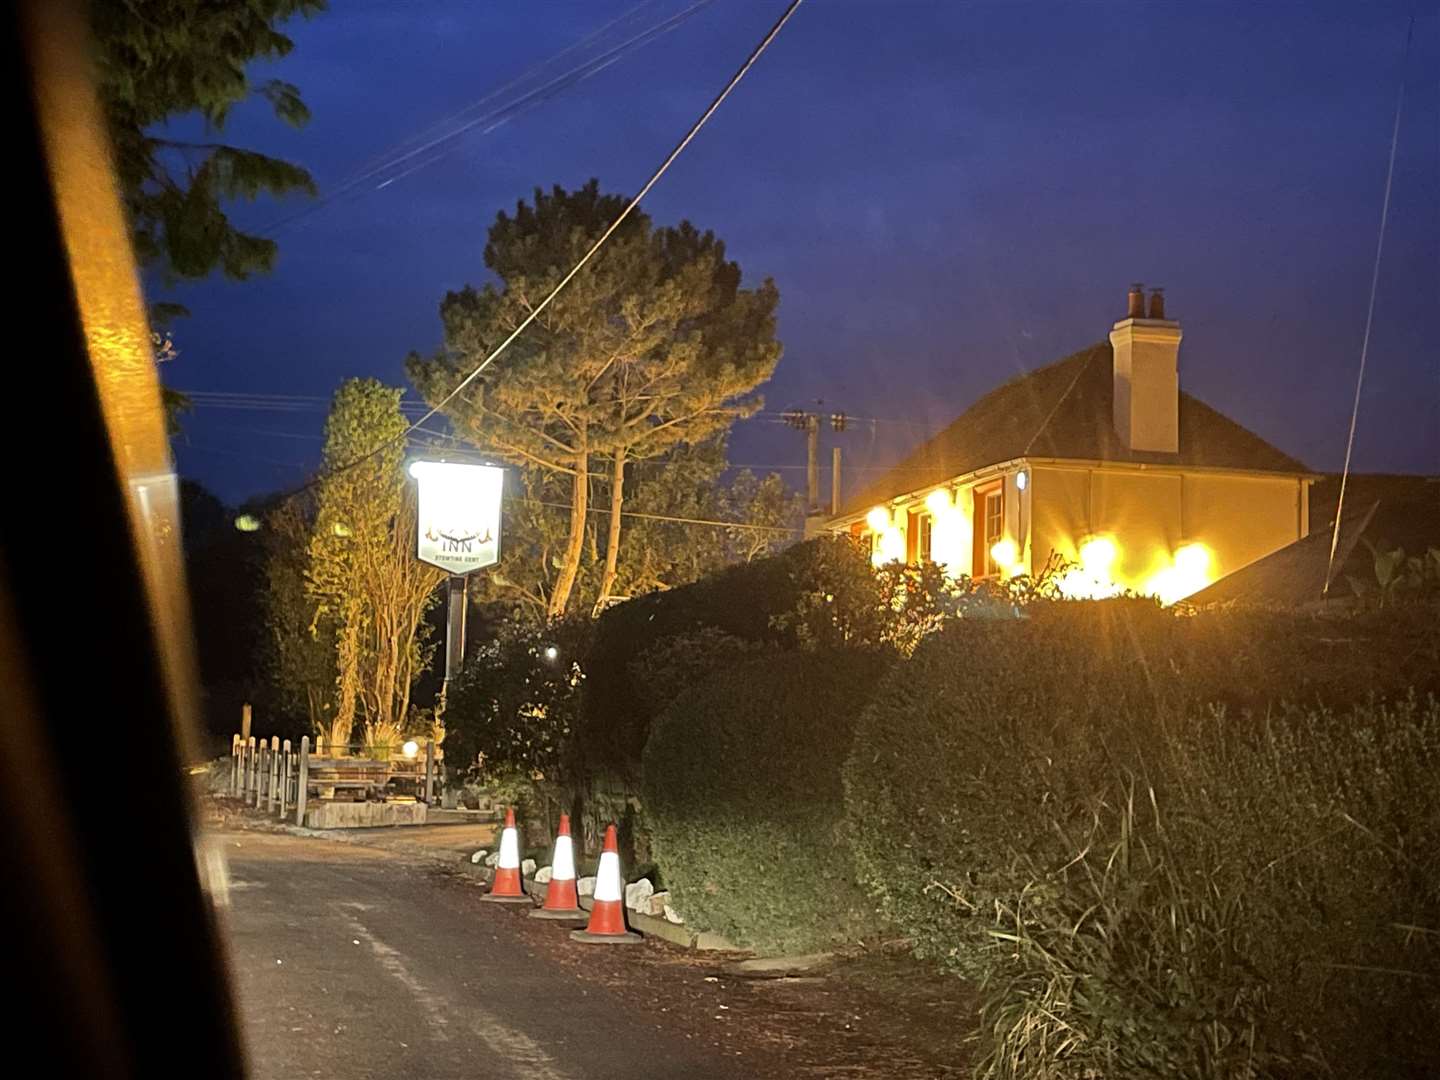 Residents have hit out at the "grossly inappropriate" lighting on the sign